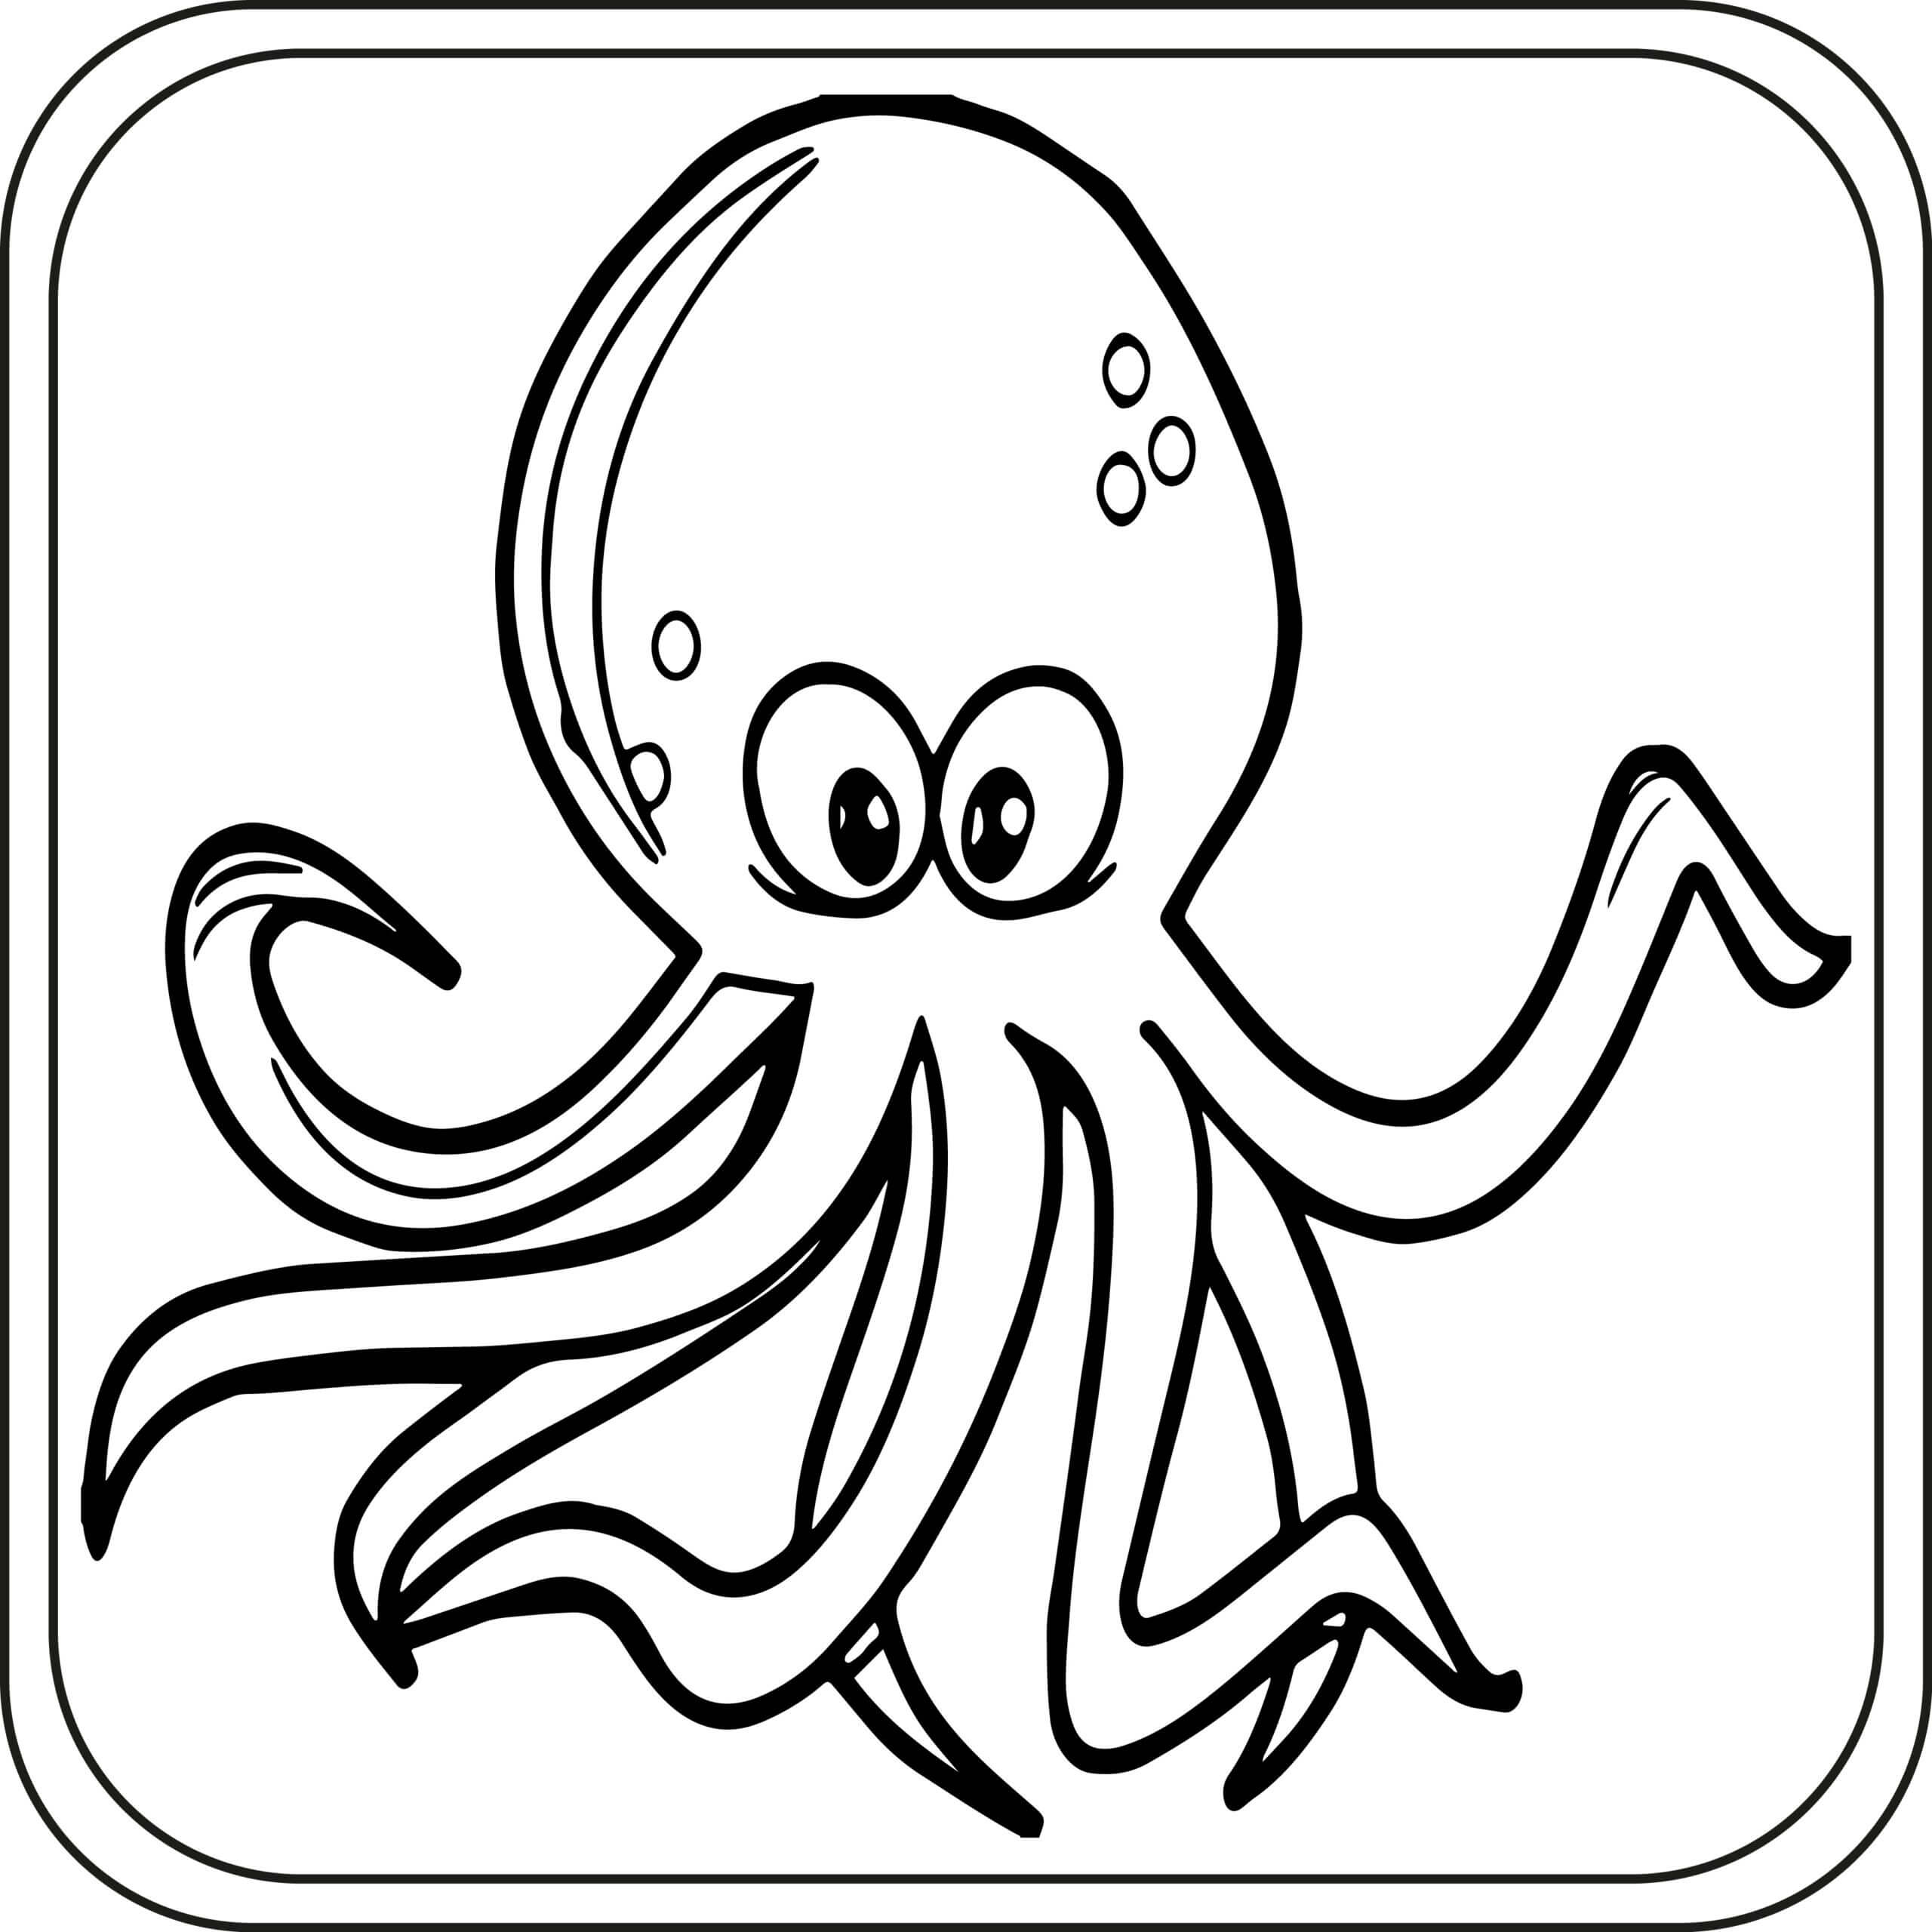 Octopus Free Pictures coloring page - Download, Print or Color Online ...